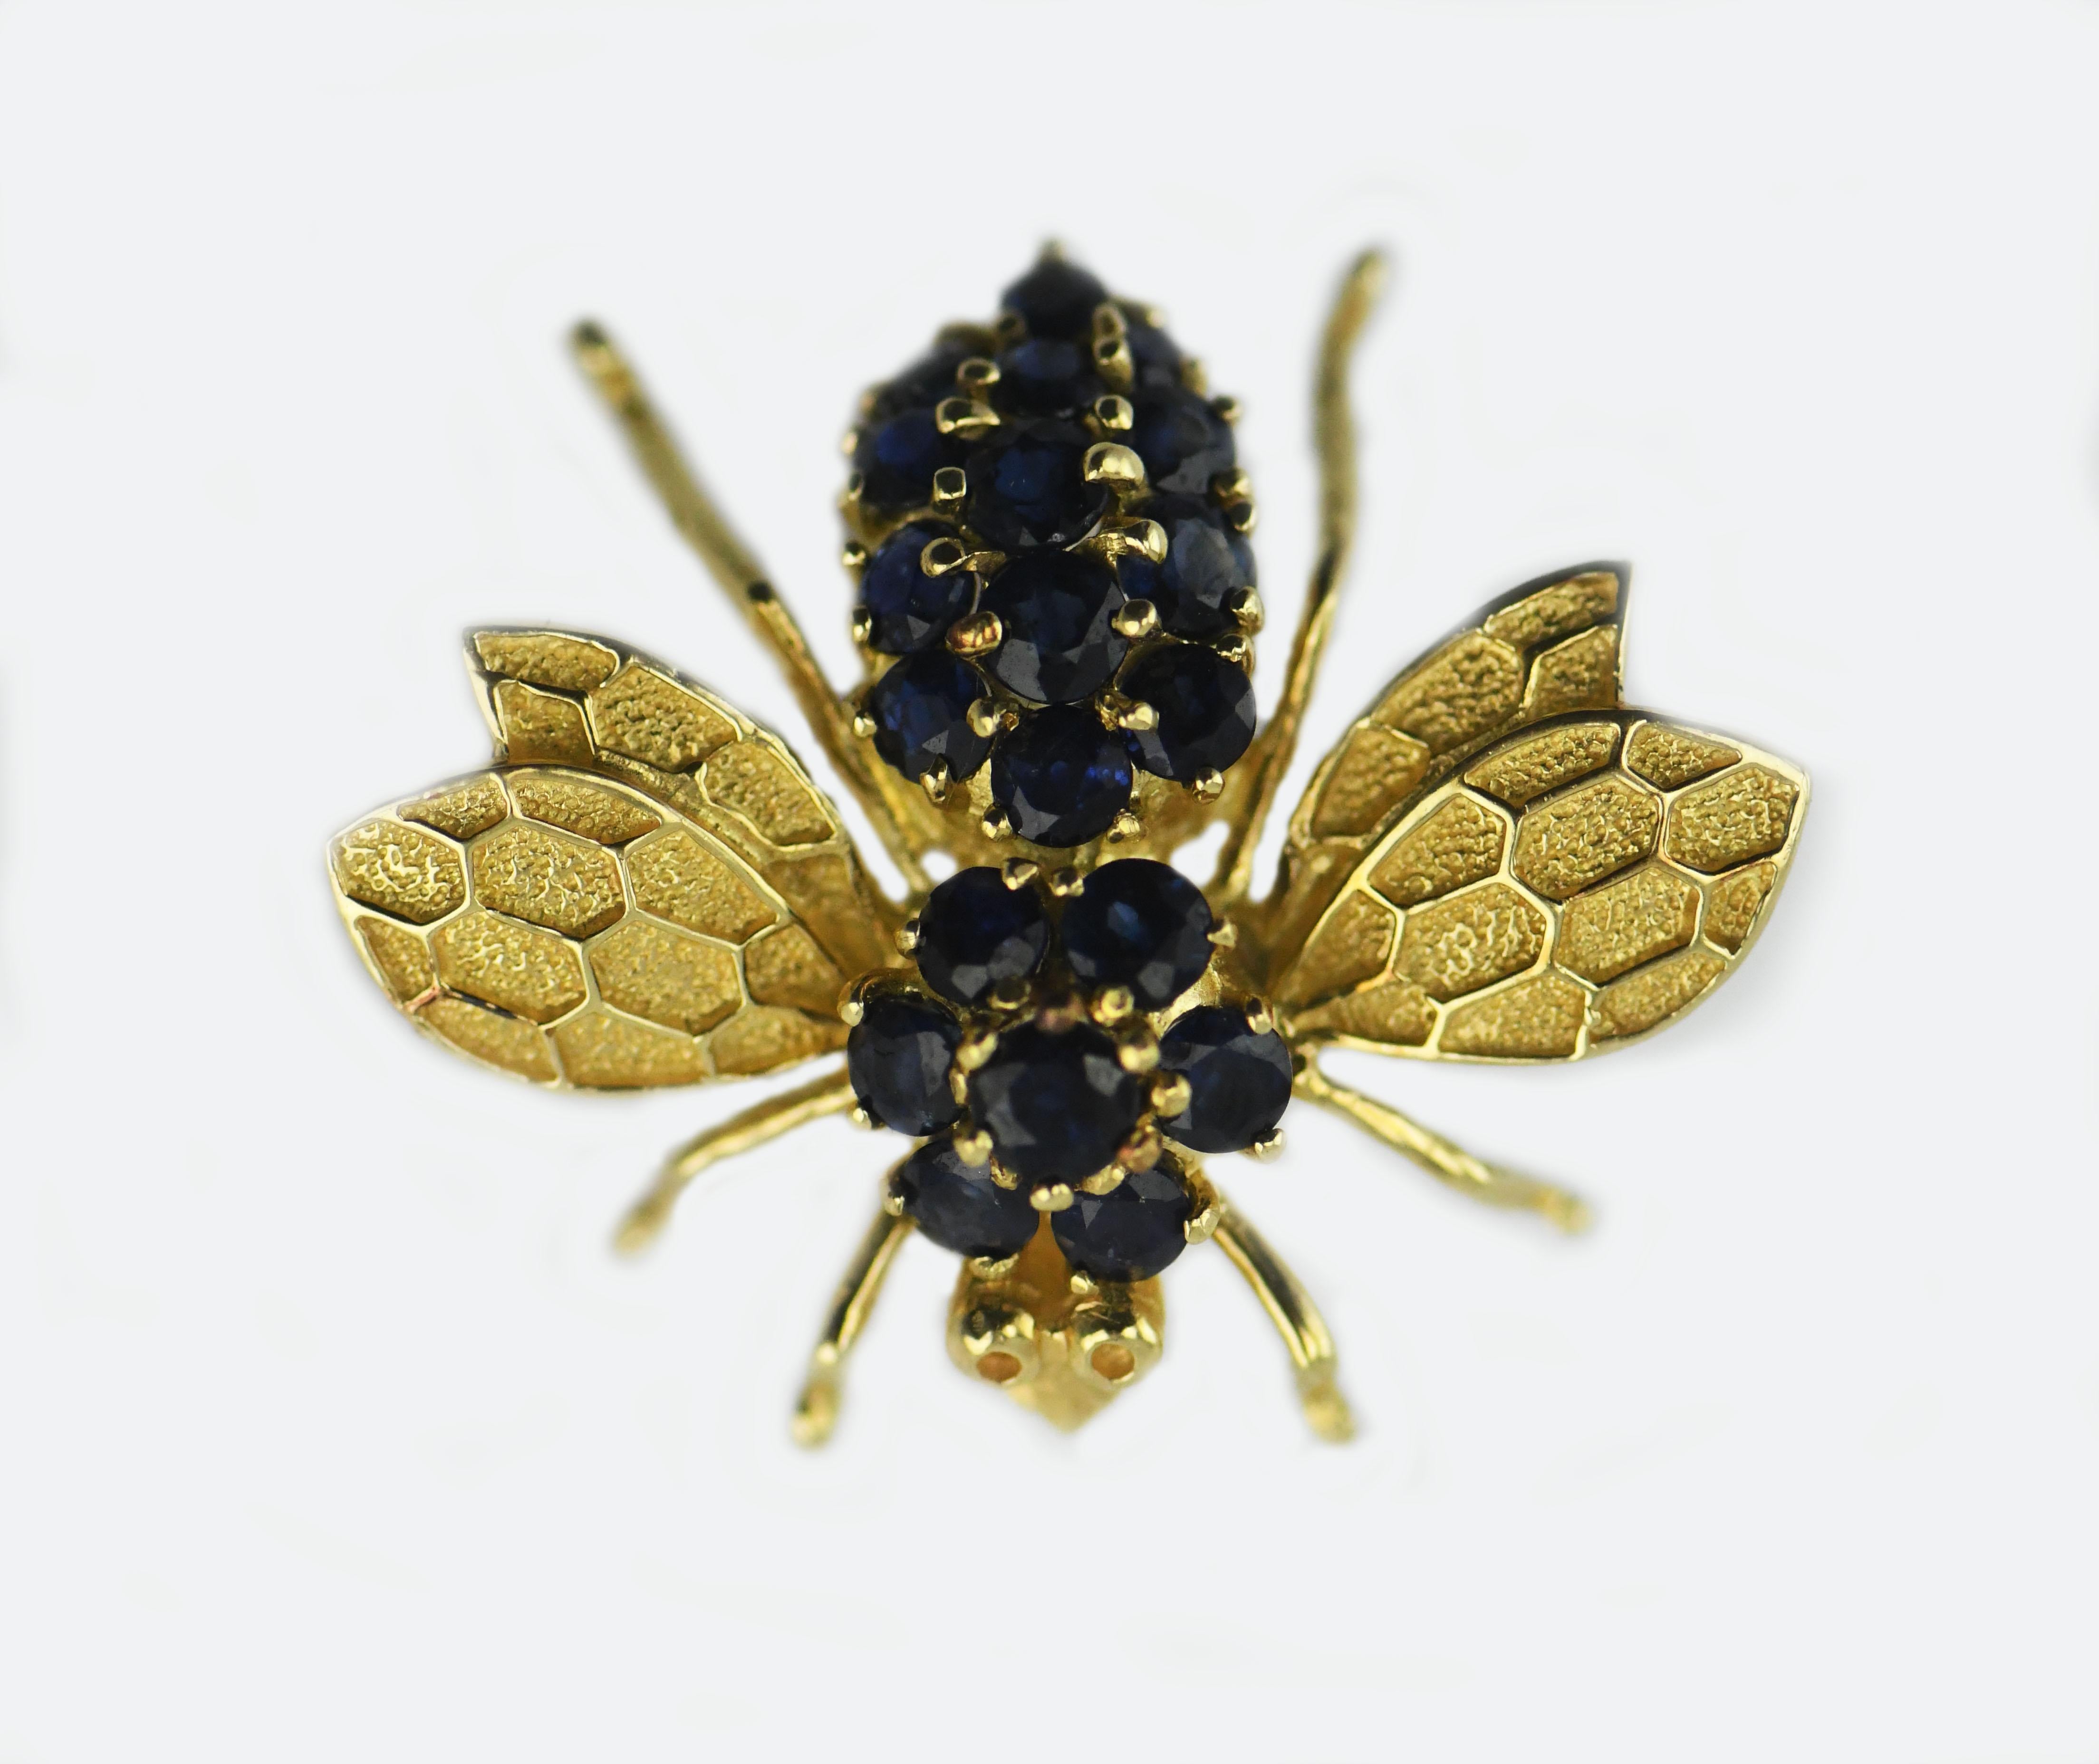 Michael Valitutti 14k Gold Bumble Bee with 20 Sapphires 1.47ctw weighing 6.2 gram. Michael Valitutti G.G. (GIA) has been in the jewelry business since 1980  and holds a Graduate Gemologist diploma from Gemological Institute of America in California.